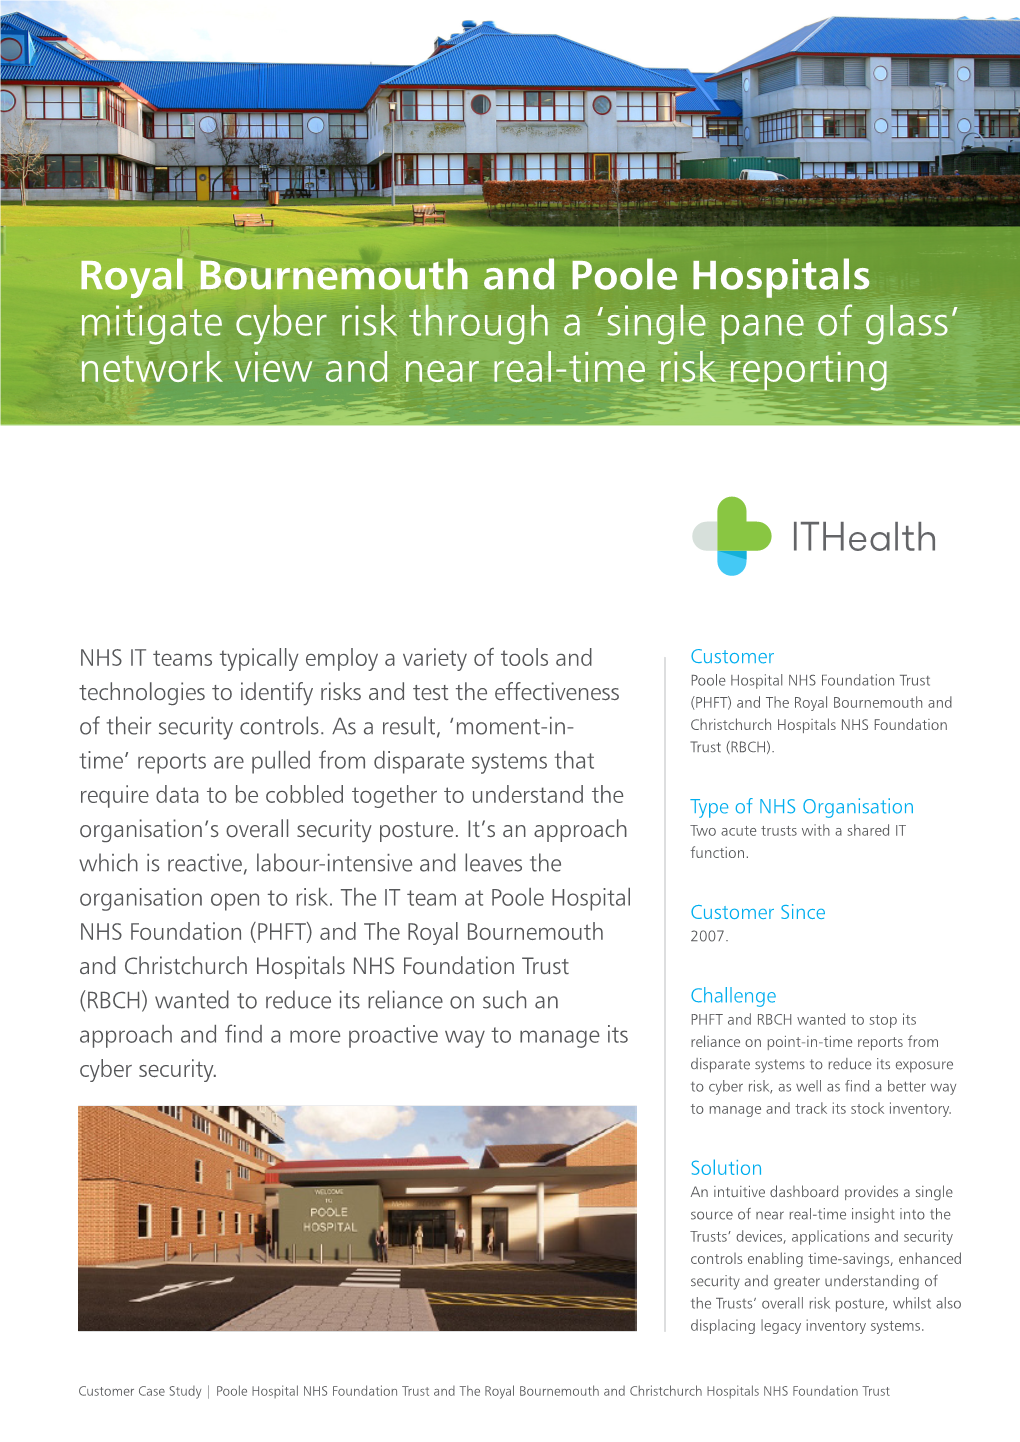 Royal Bournemouth and Poole Hospitals Mitigate Cyber Risk Through a ‘Single Pane of Glass’ Network View and Near Real-Time Risk Reporting